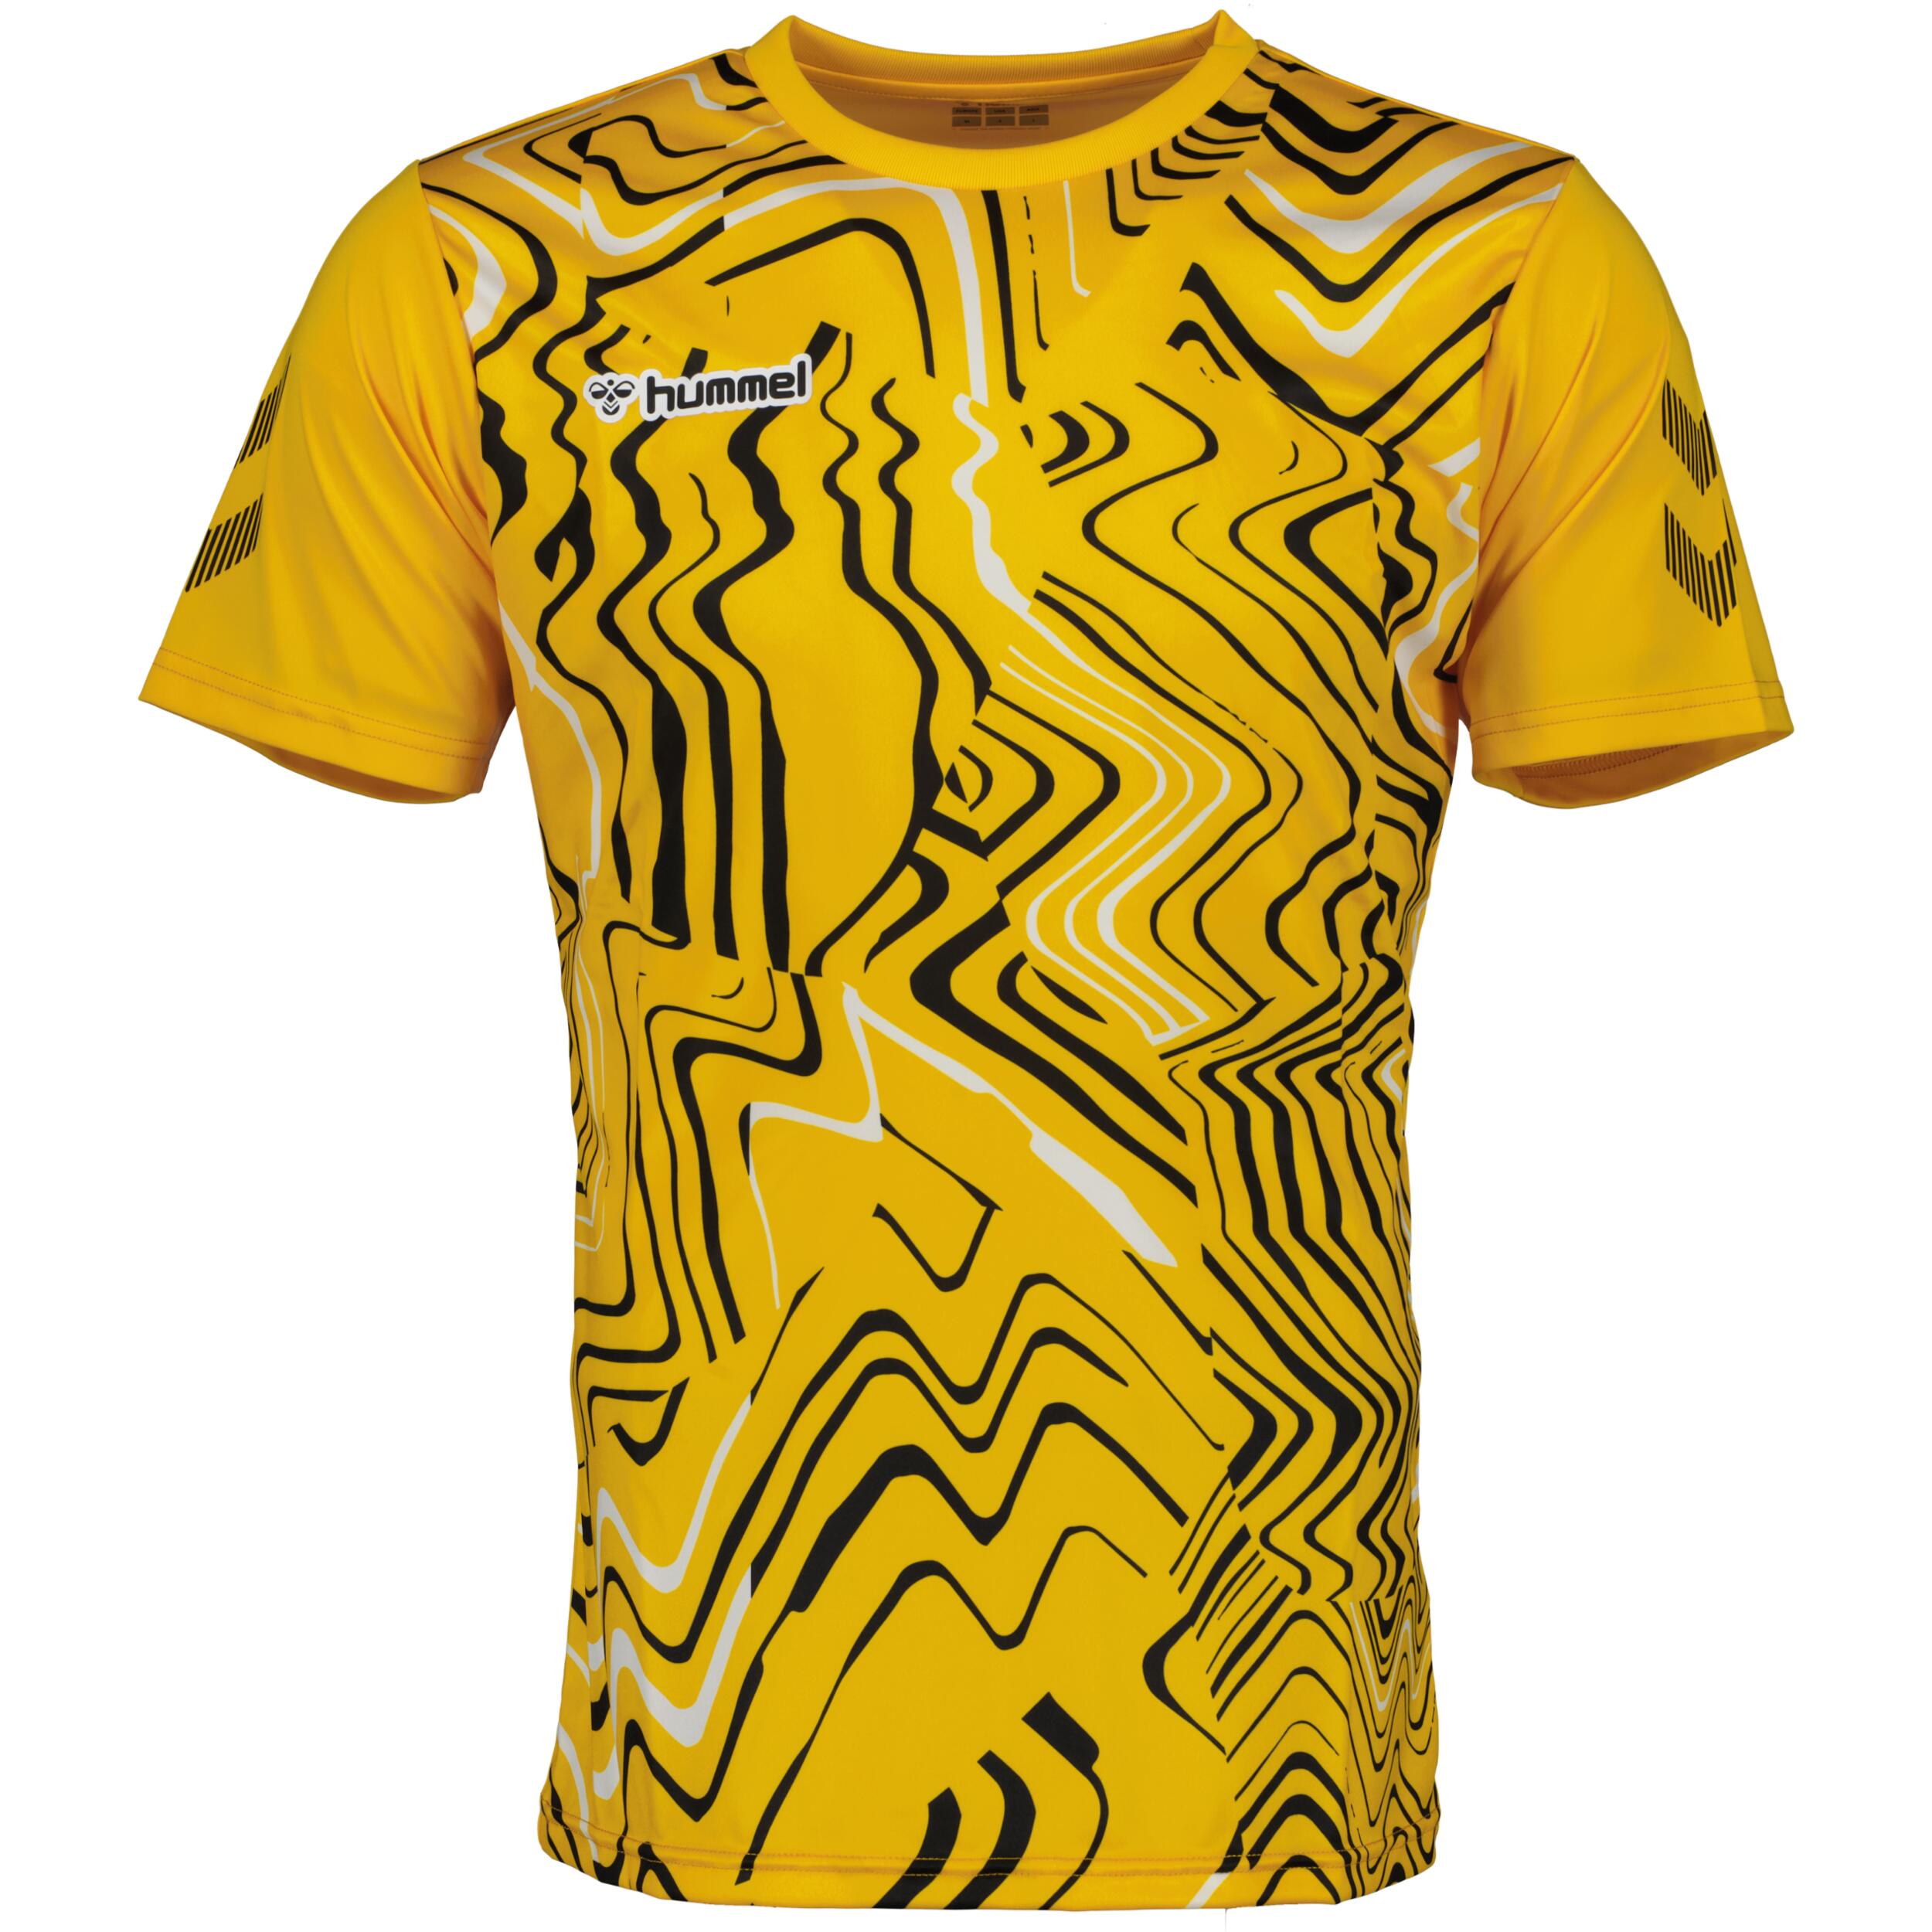 HUMMEL Hydro jersey for kids, great for football, in sports yellow/black/white